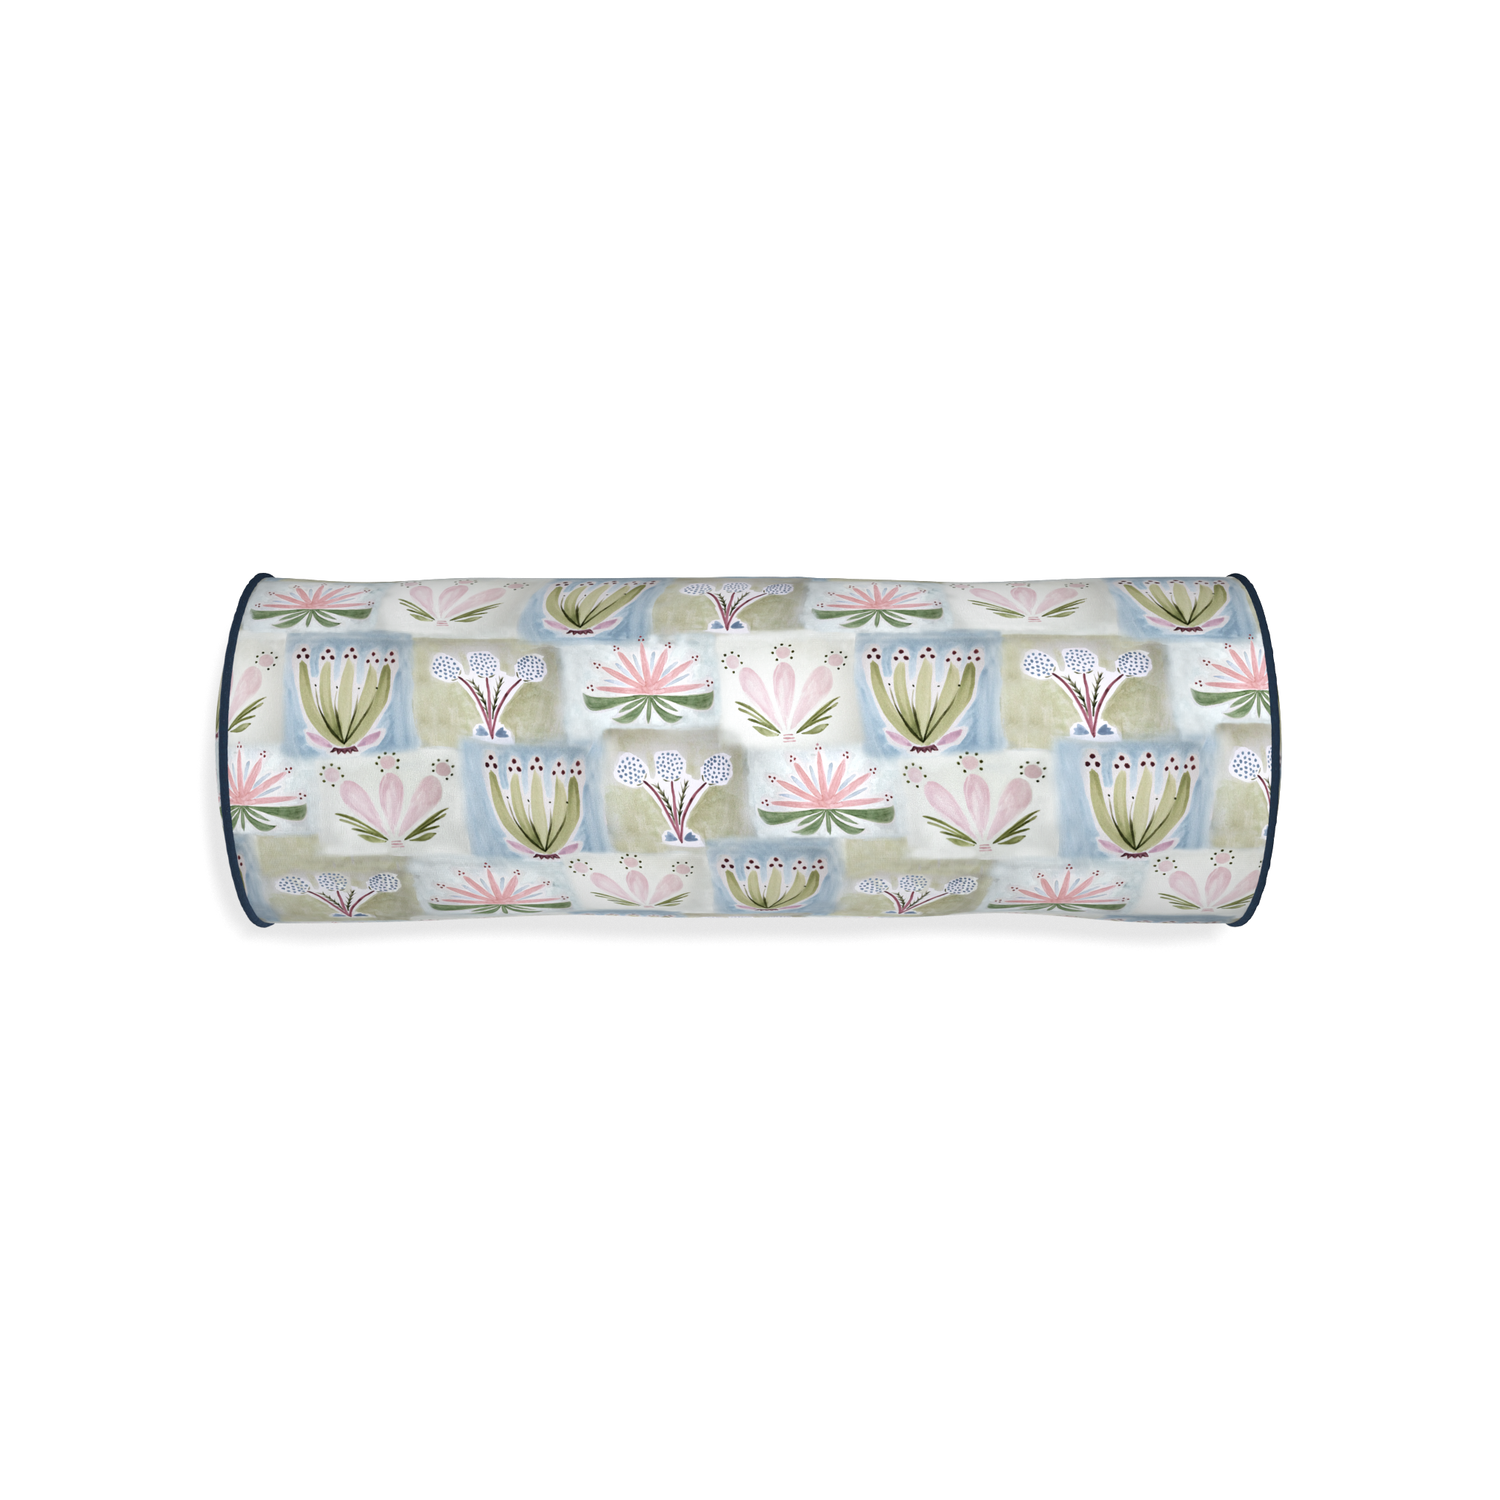 Bolster harper custom hand-painted floralpillow with c piping on white background